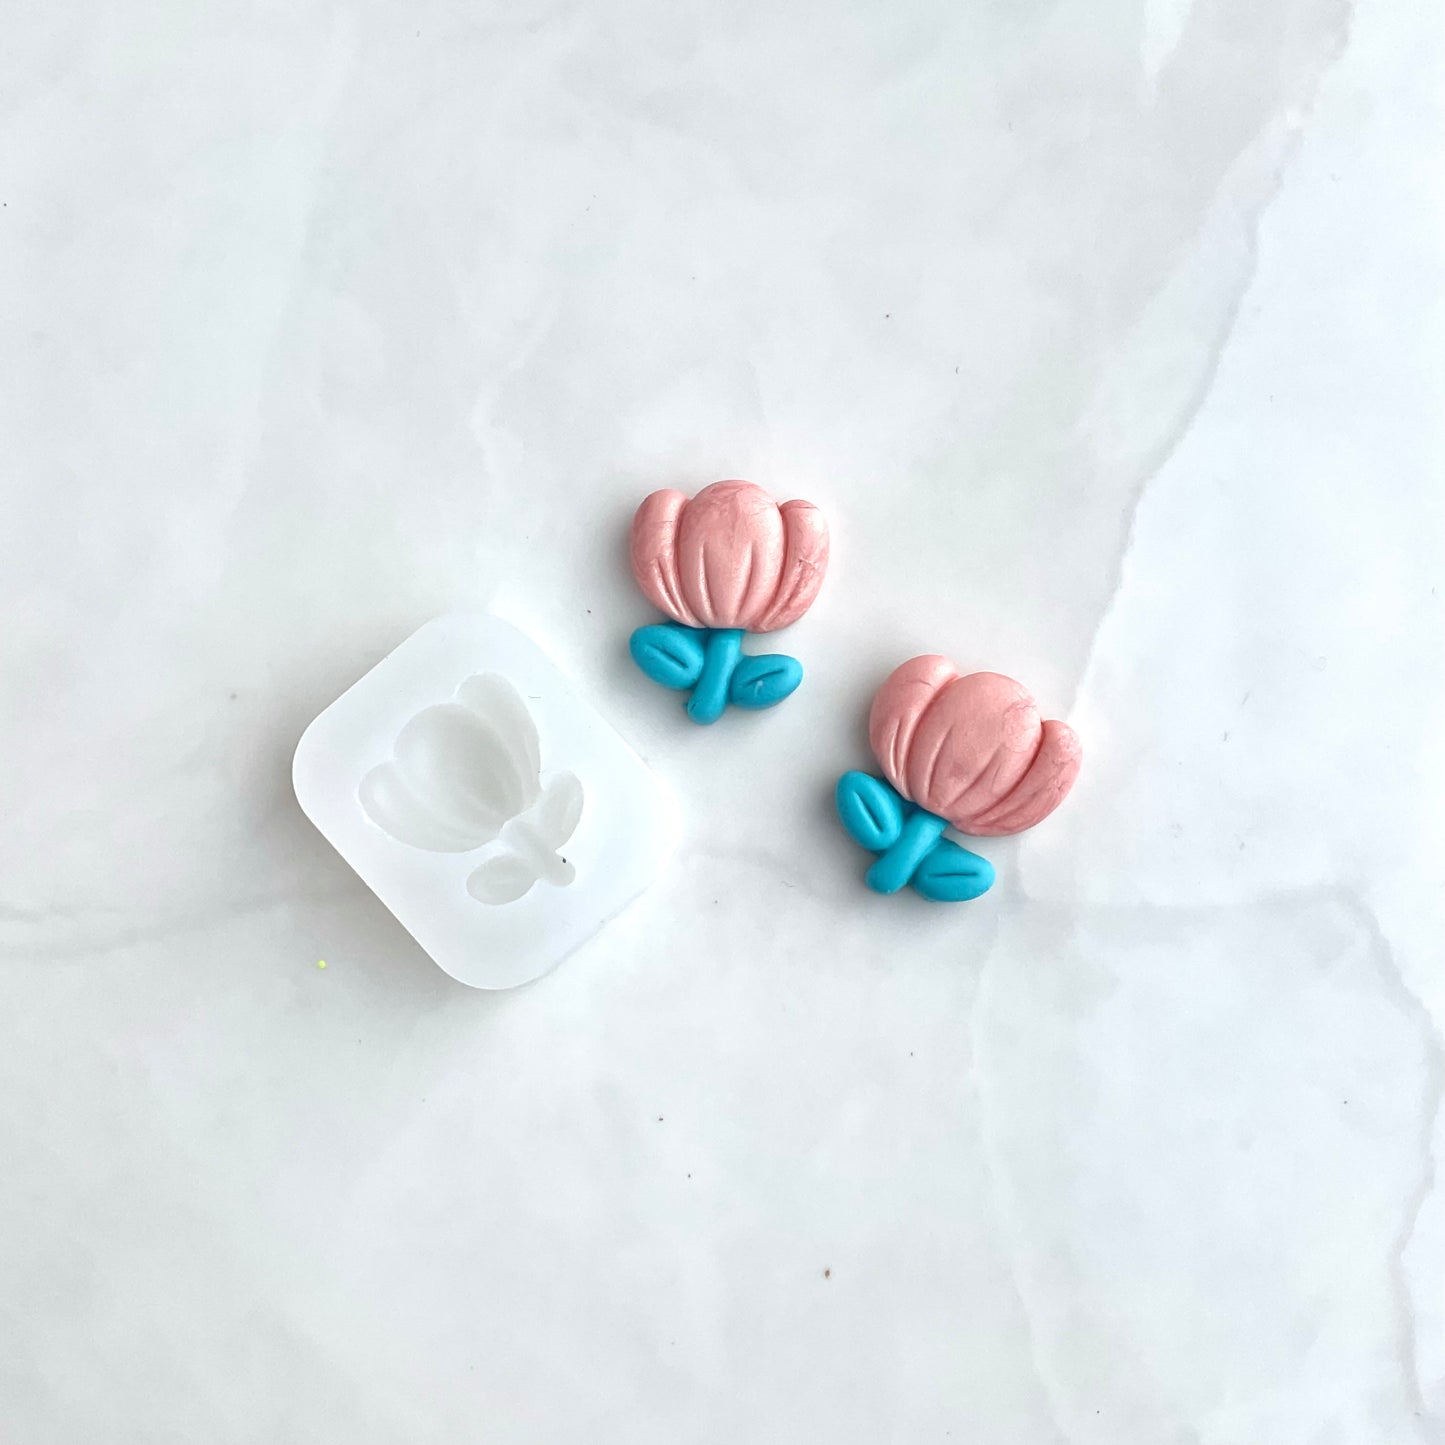 silicone flower mold and flower earrings on a white background